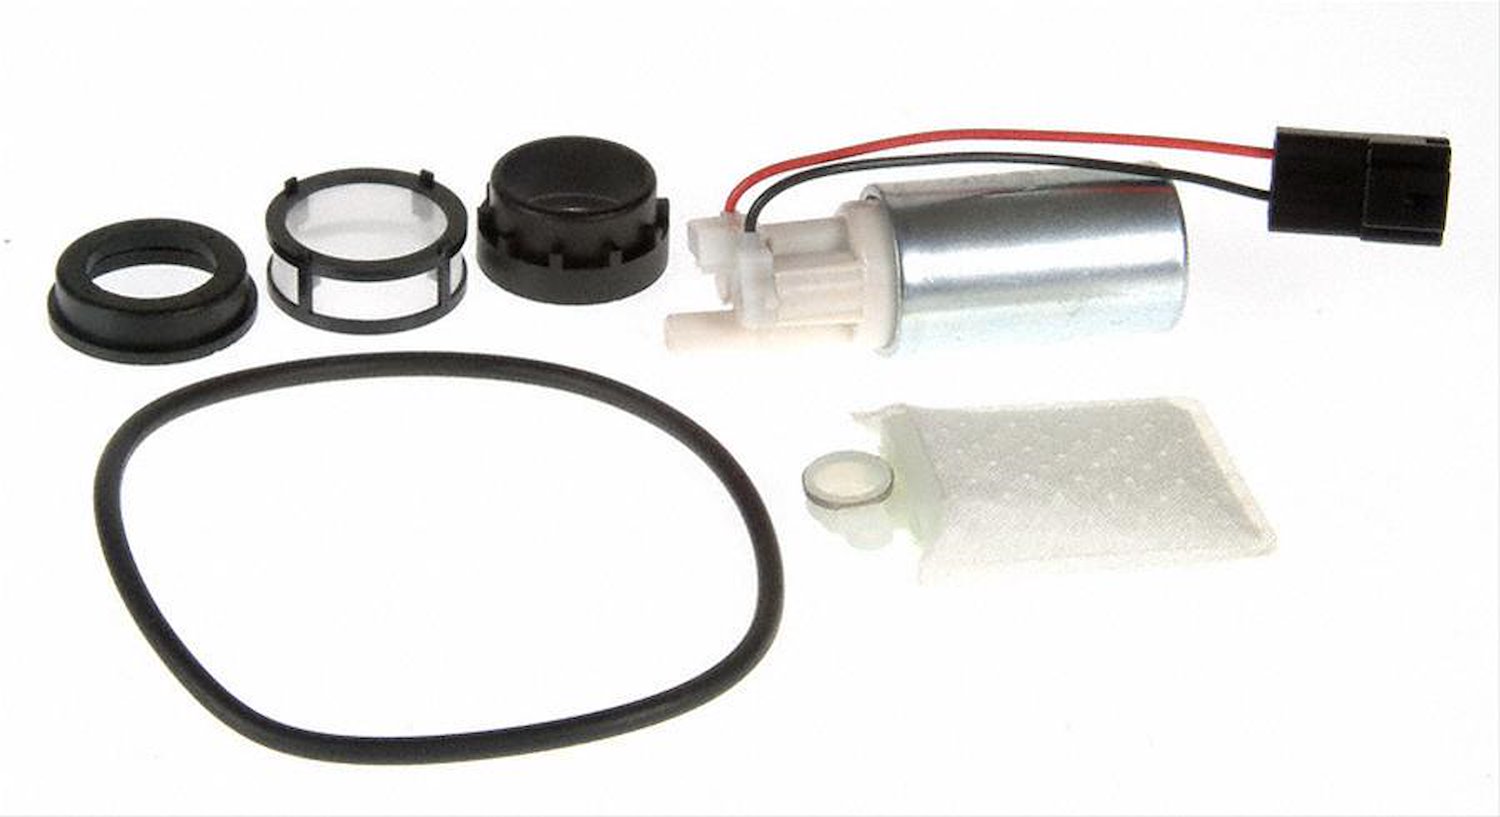 EFI In-Tank Electric Fuel Pump And Strainer Set for 1996-1997 Ford Taurus/Mercury Sable